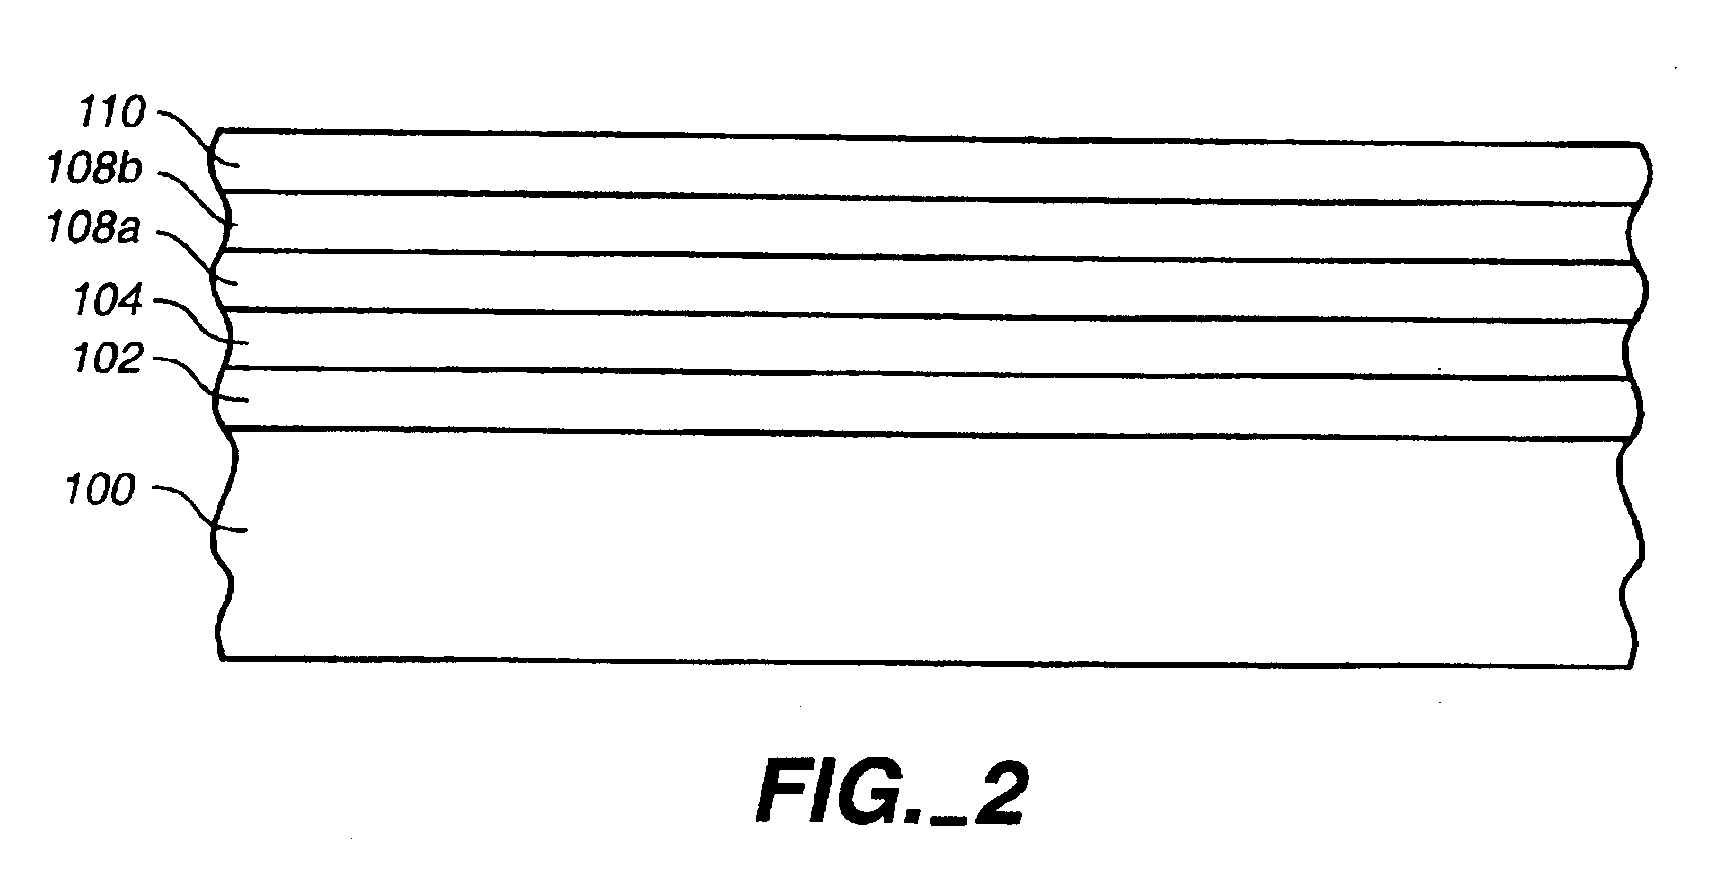 Magnetic disk comprising a first carbon overcoat having a high SP3 content and a second carbon overcoat having a low SP3 content